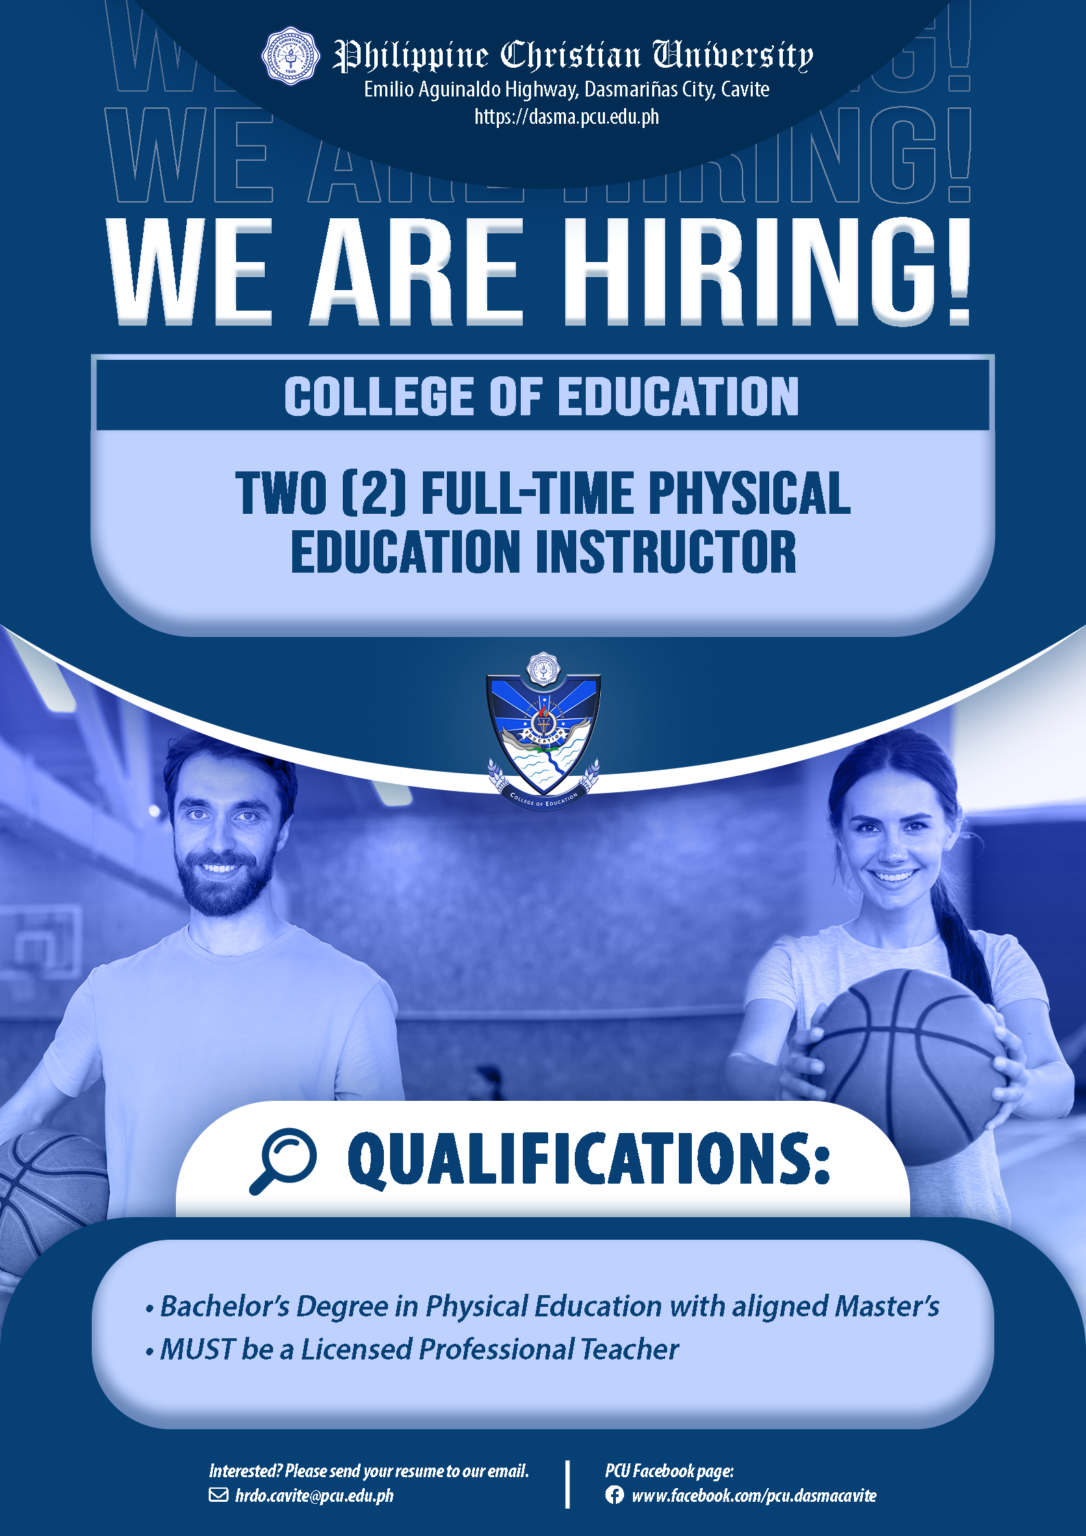 b. FULL-TIME PHYSICAL EDUCATION INSTRUCTOR